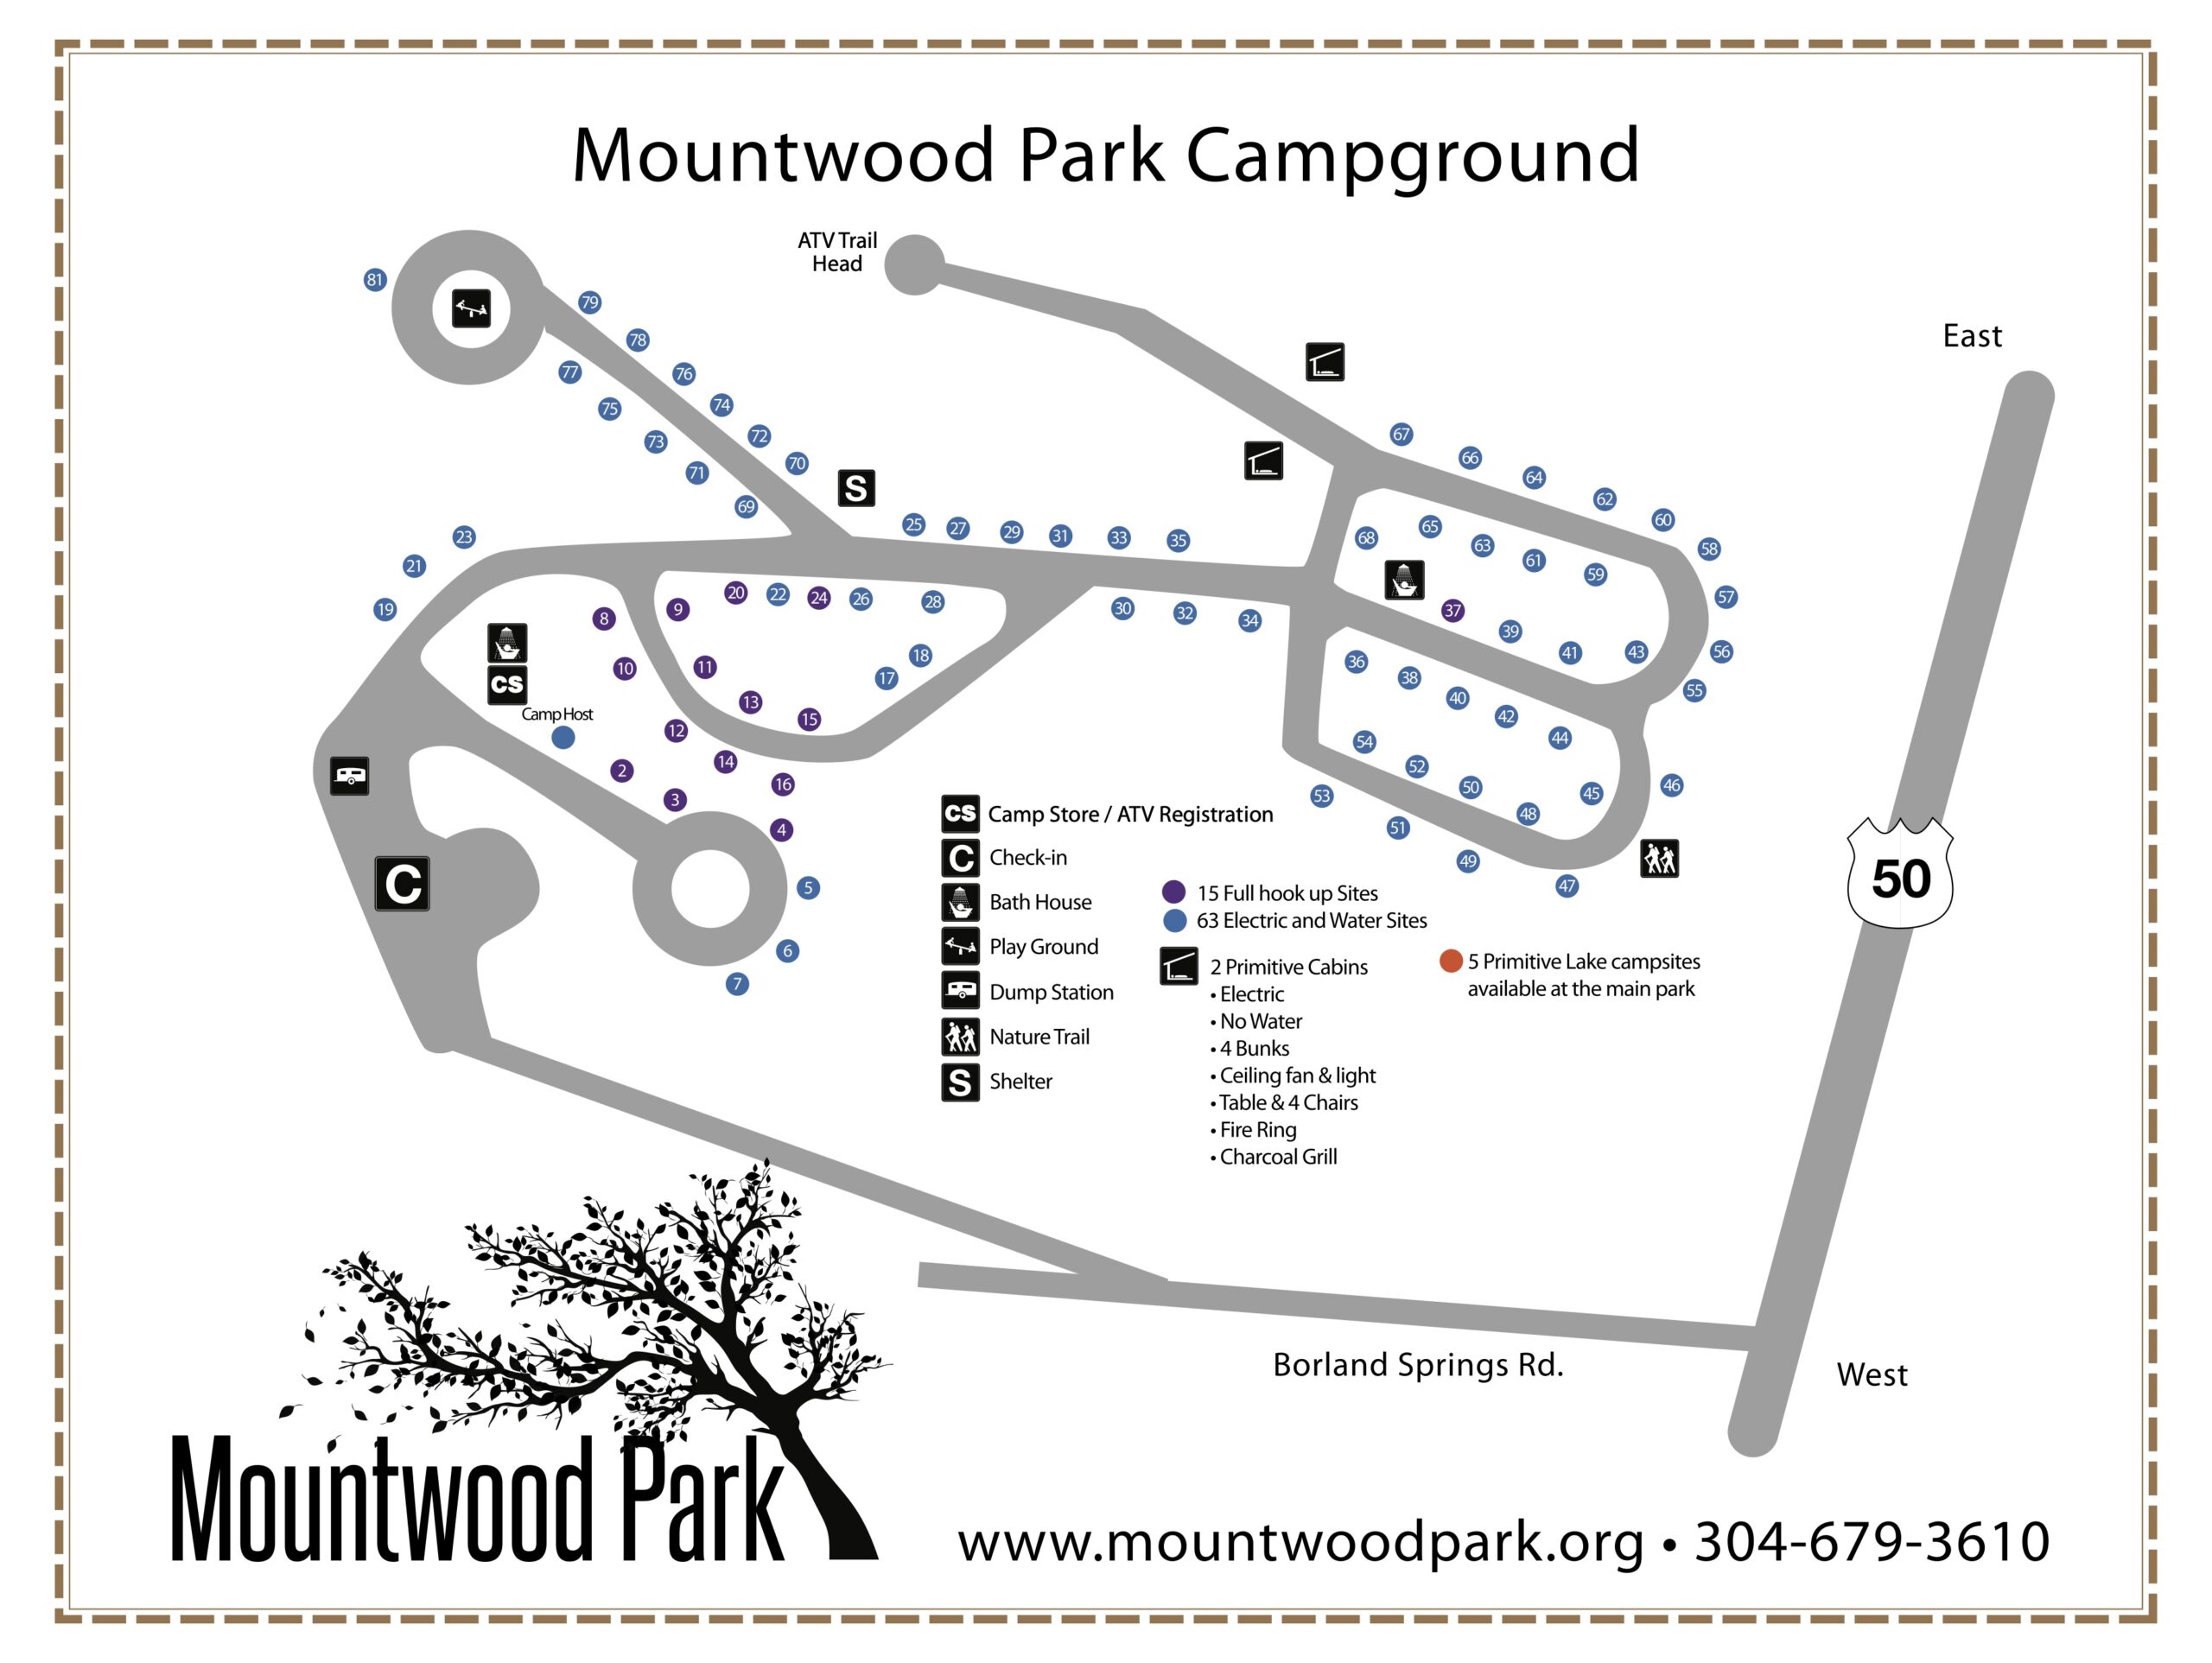 Campground - Mountwood Park